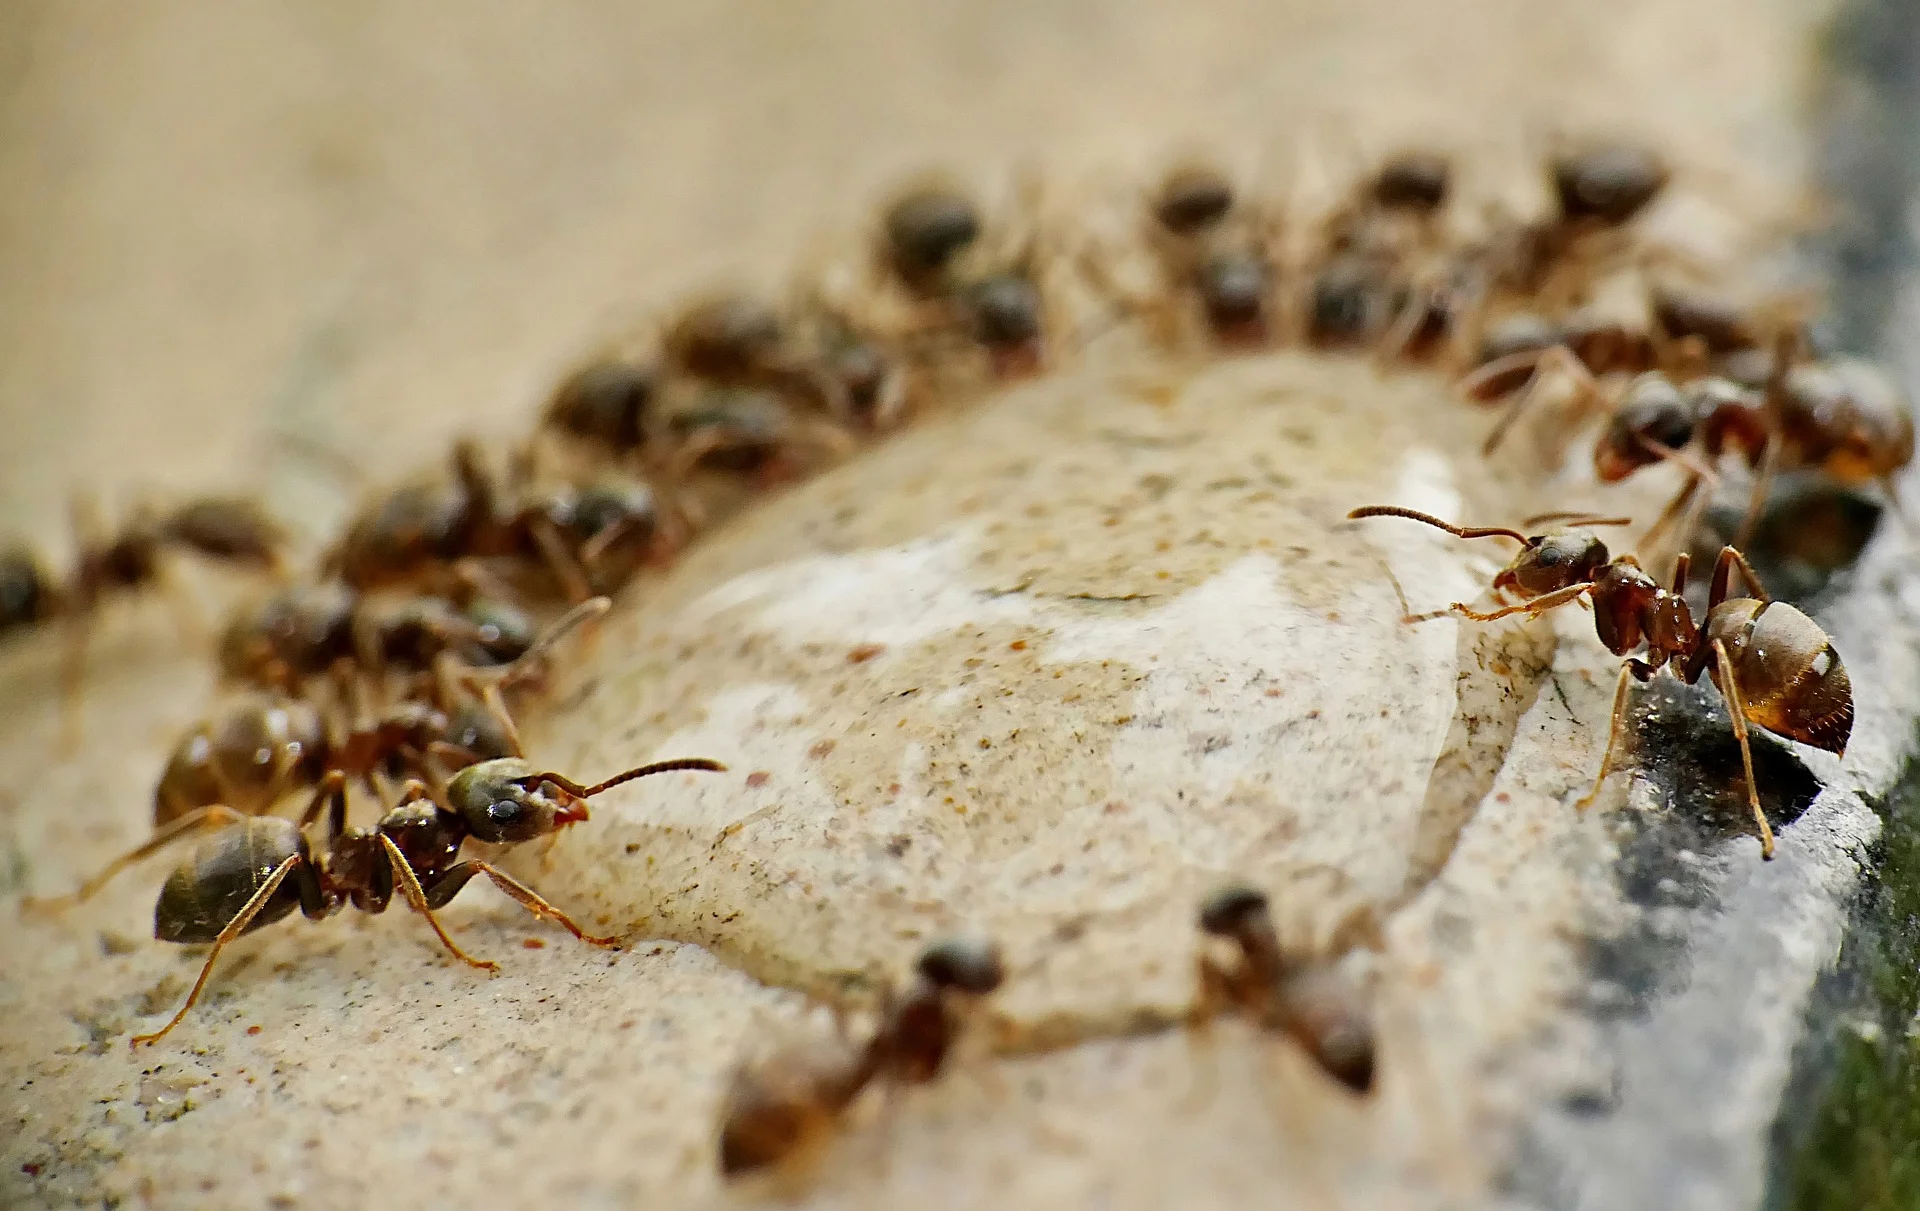 How to Use Vinegar as Ant Killers? - Pest Control Boise Idaho